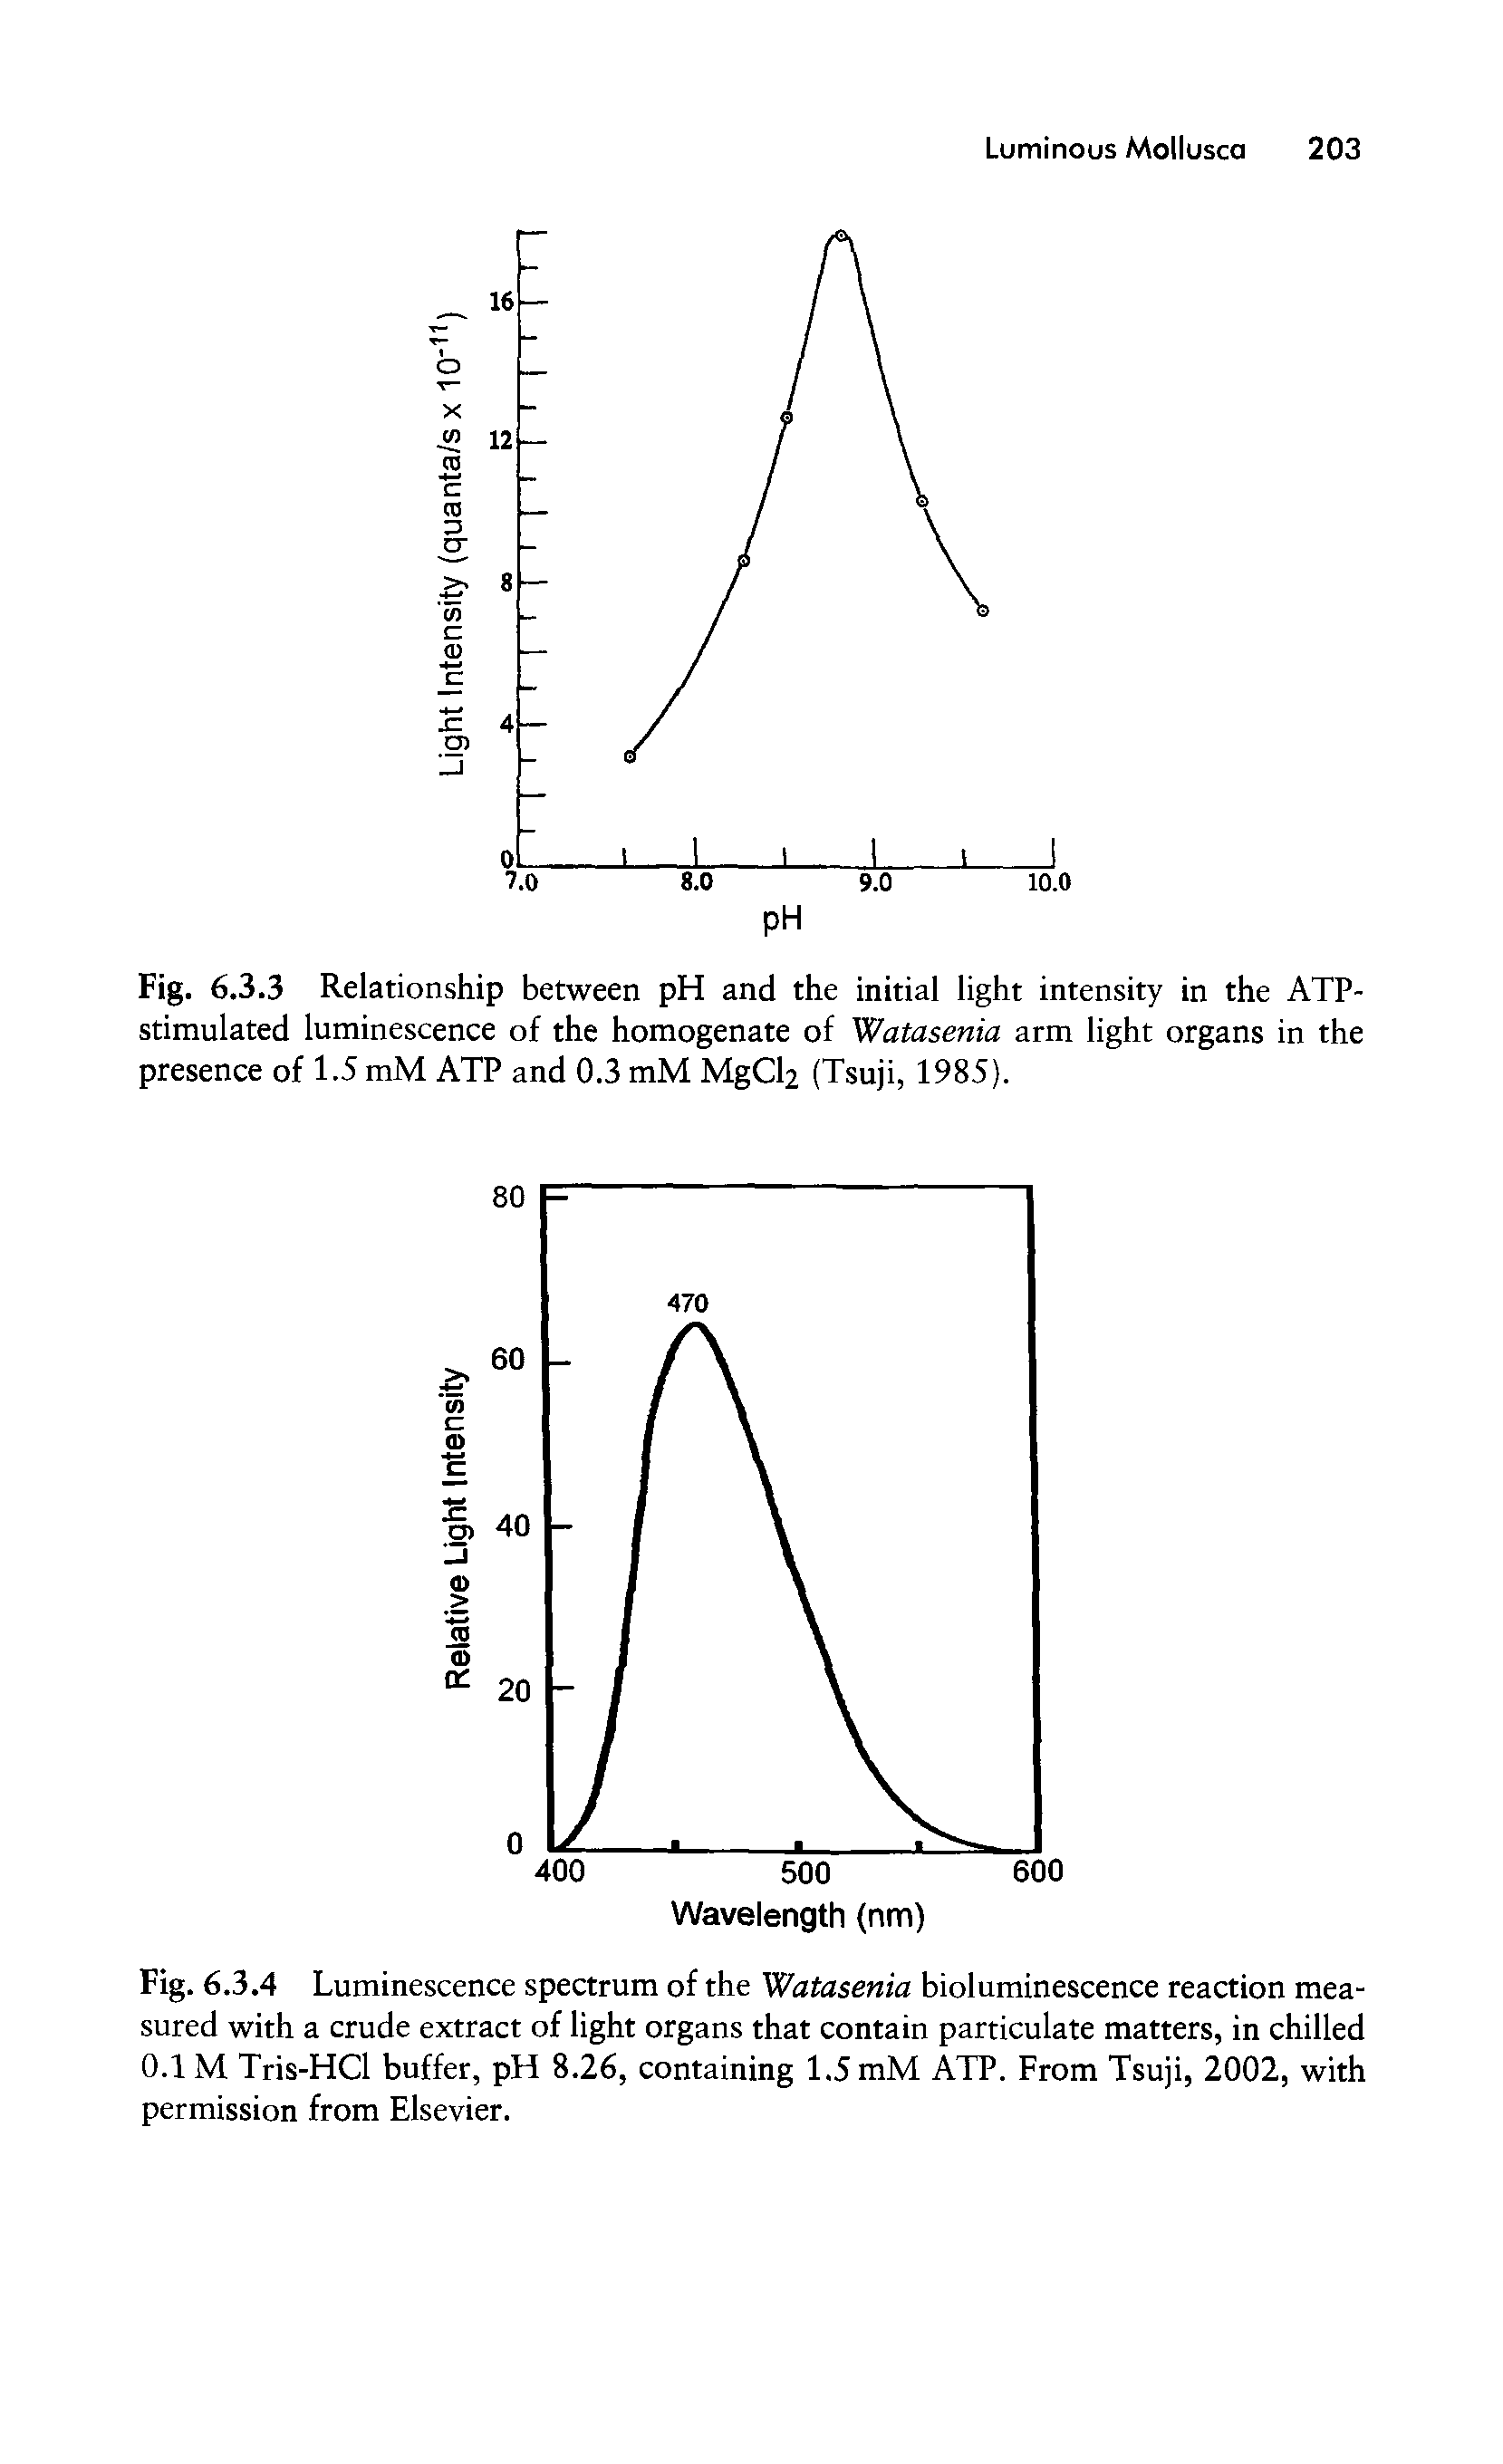 Fig. 6.3.4 Luminescence spectrum of the Watasenia bioluminescence reaction measured with a crude extract of light organs that contain particulate matters, in chilled 0.1 M Tris-HCl buffer, pH 8.26, containing 1.5 mM ATP. From Tsuji, 2002, with permission from Elsevier.